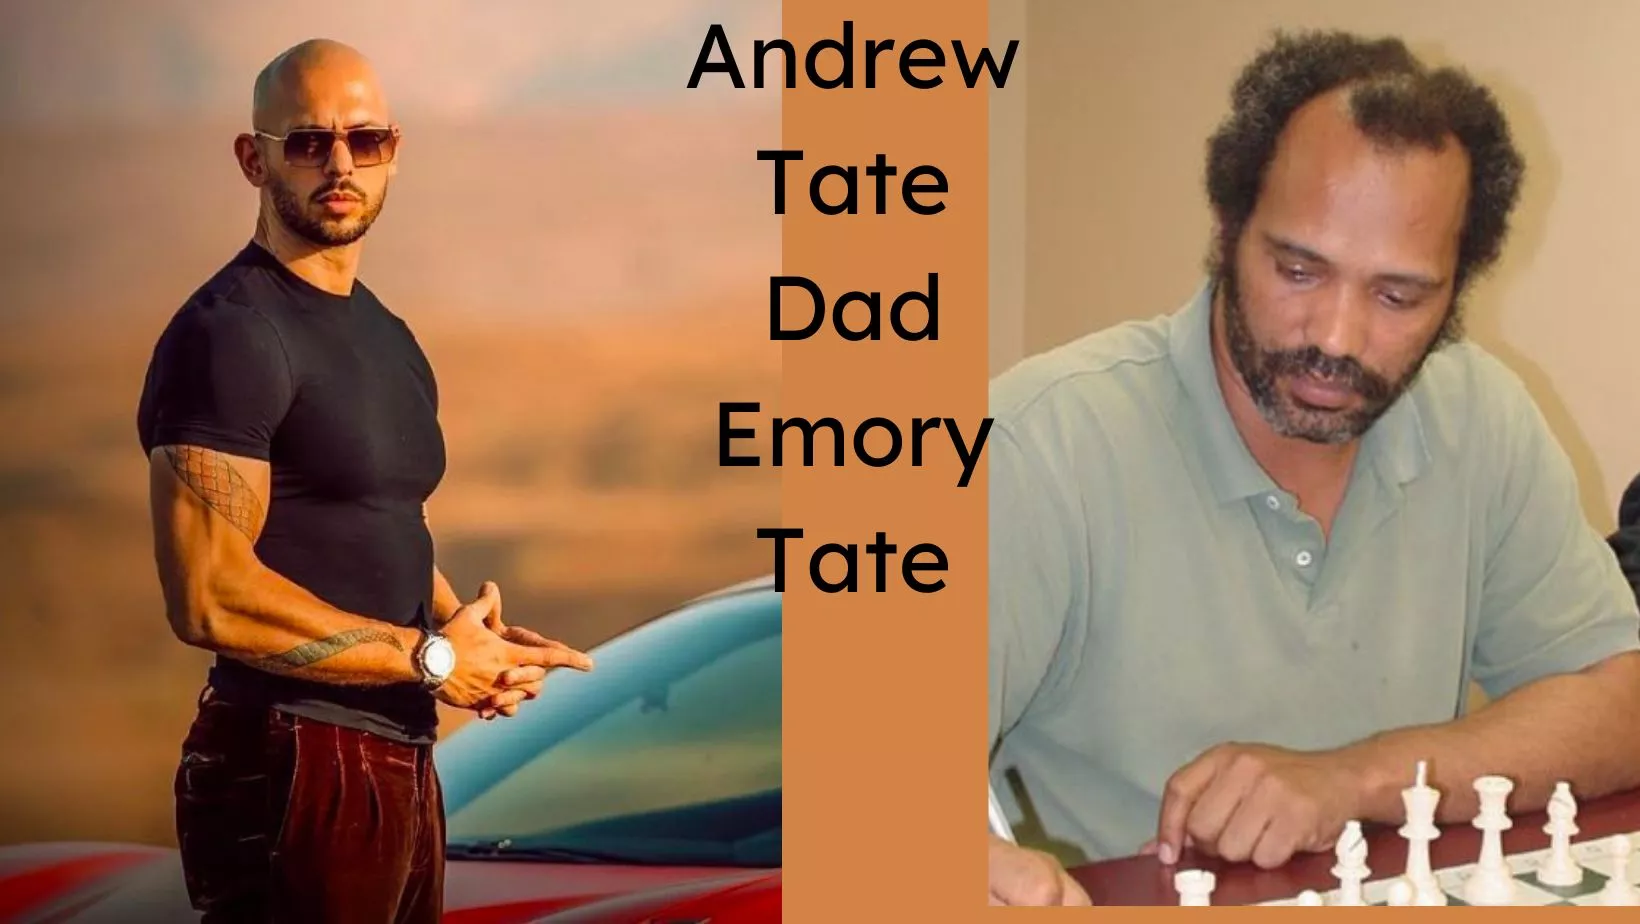 Who Was Andrew Tate Dad? Emory Tate Biography